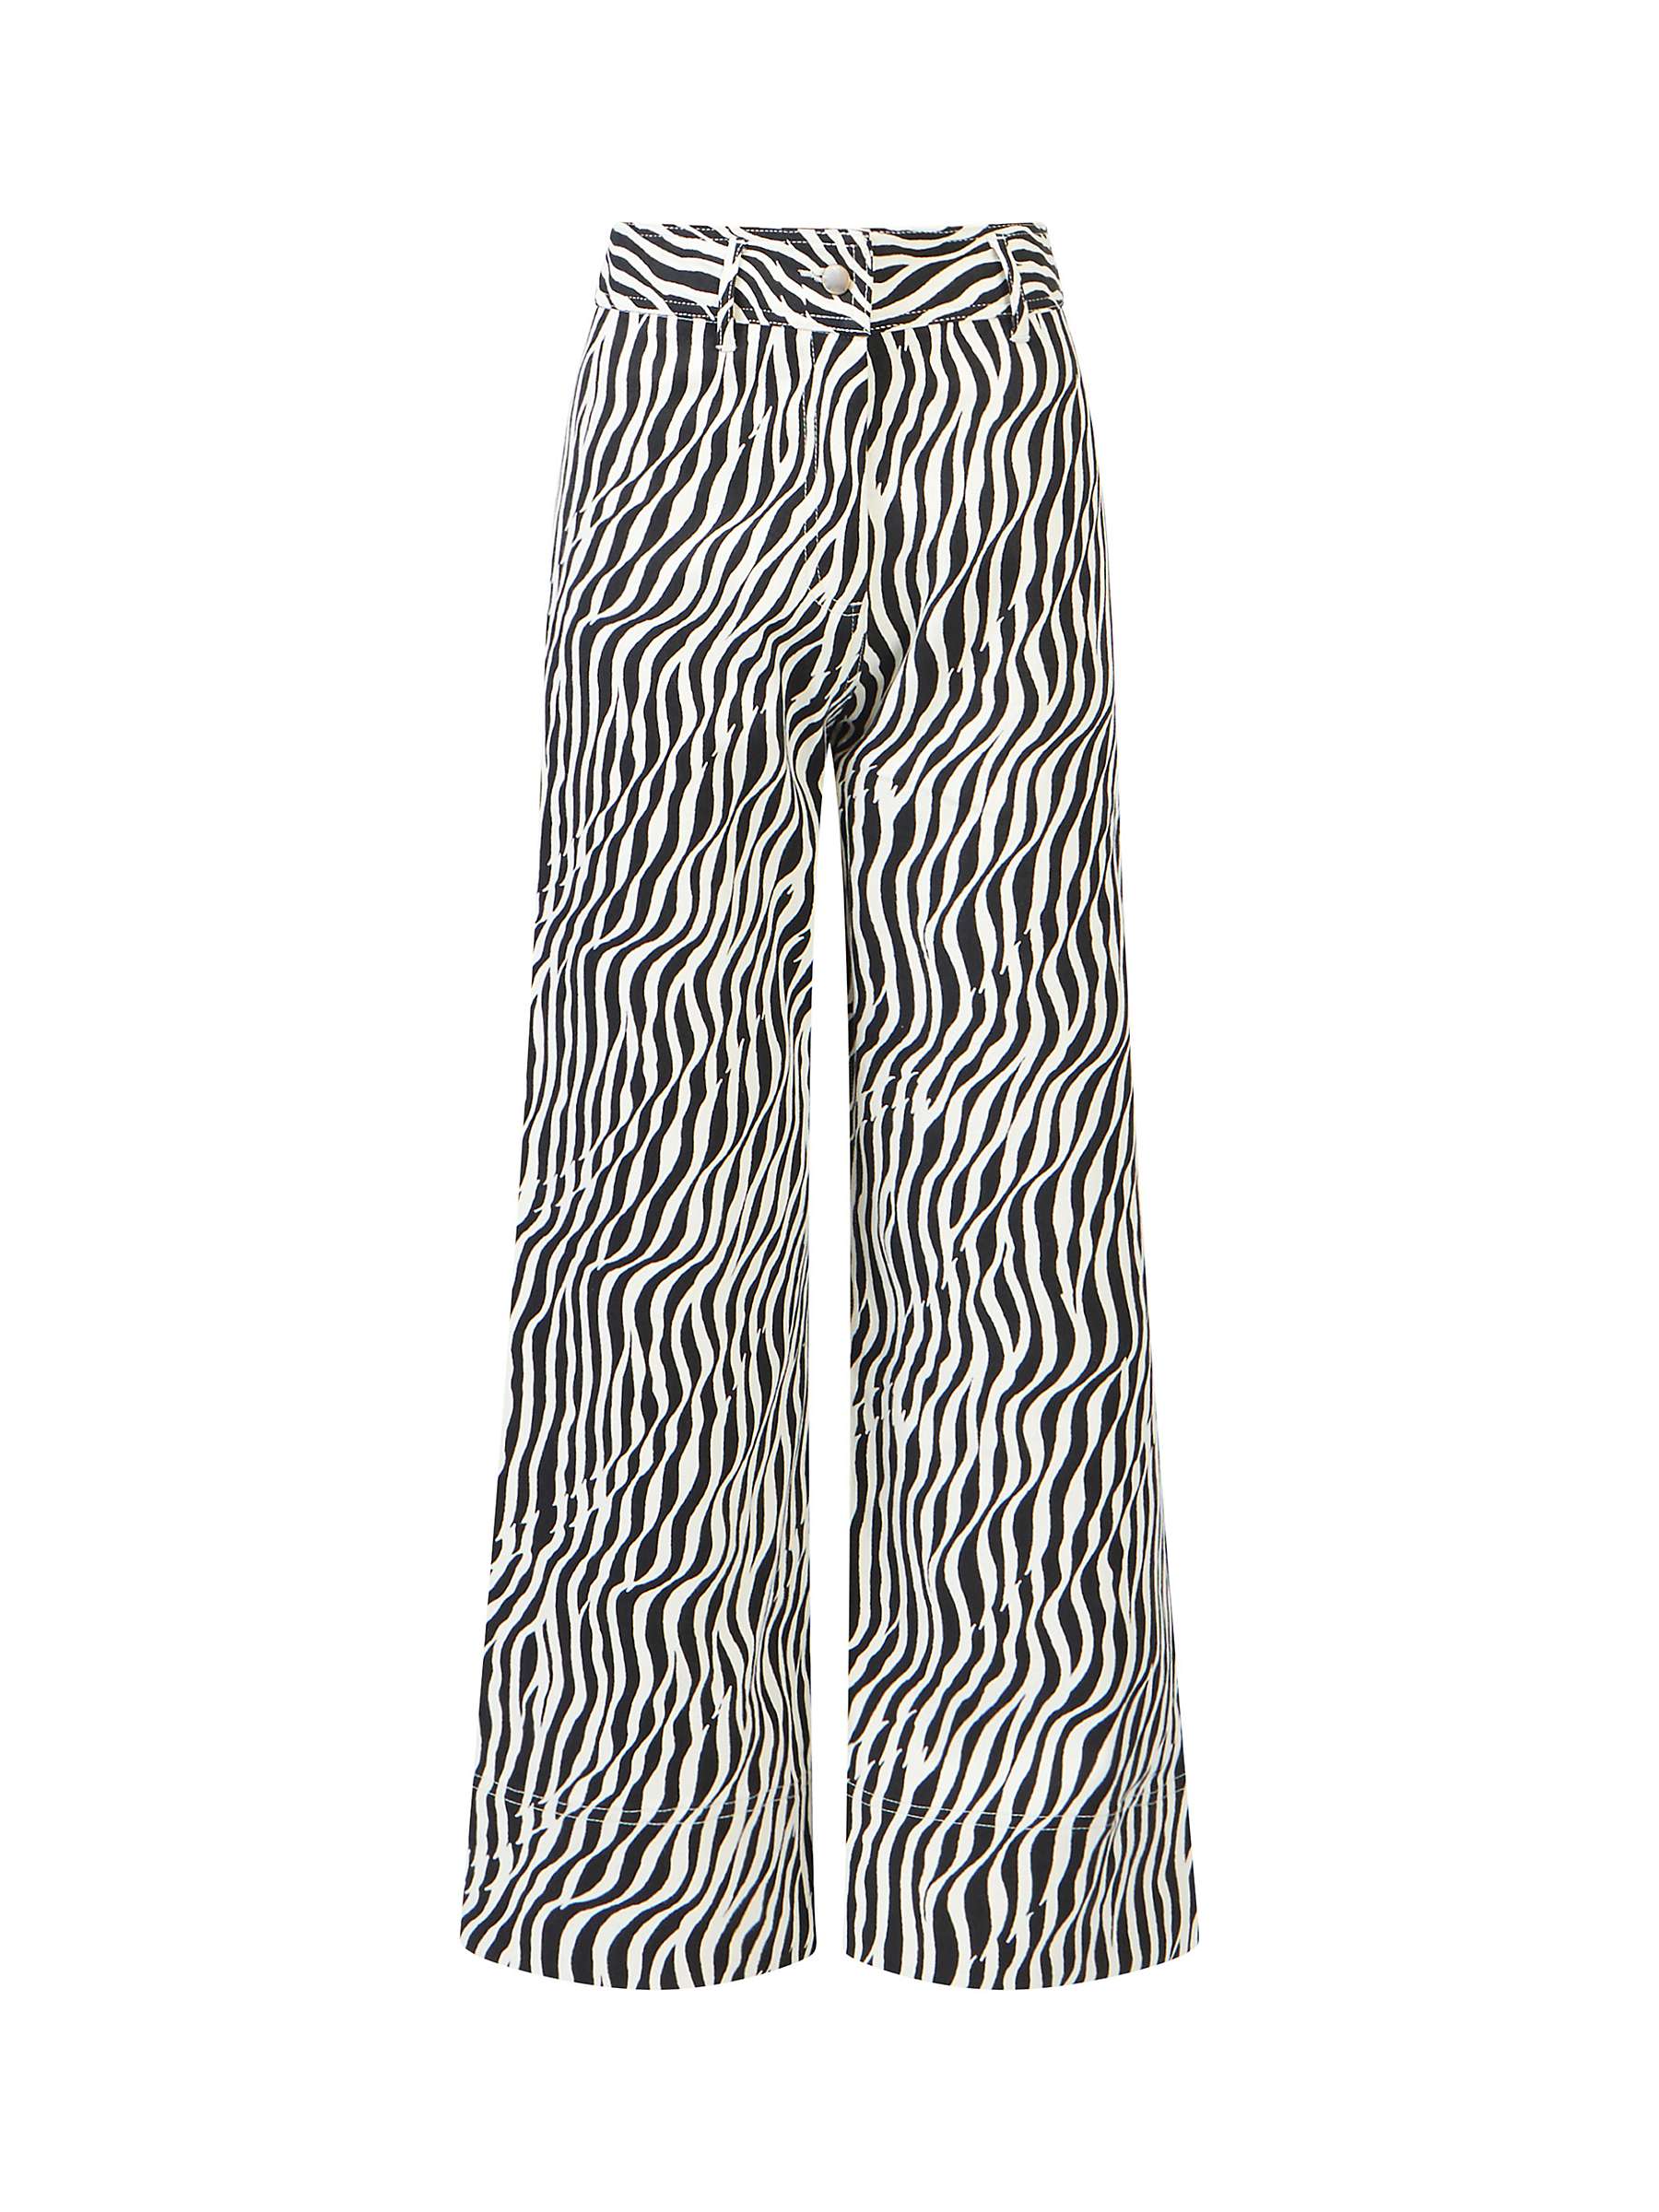 Buy French Connection Seine Atena Wave Print Cropped Twill Trousers, Black/White Online at johnlewis.com